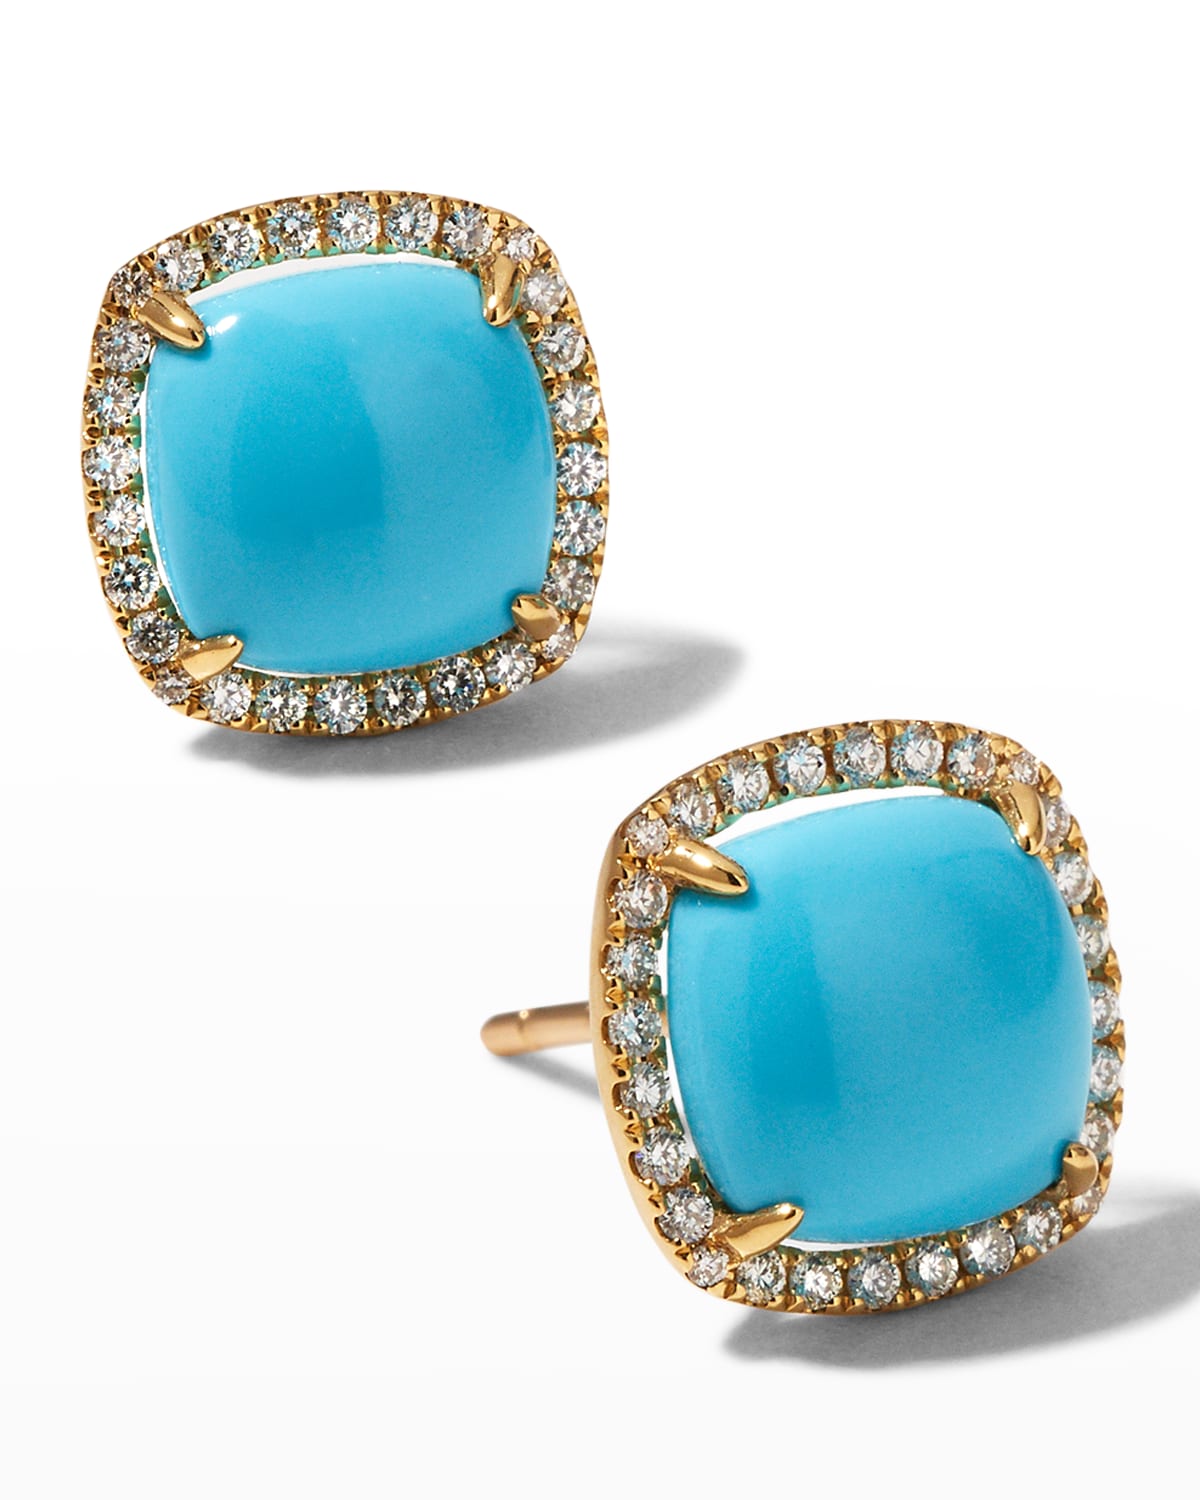 Frederic Sage Yellow Gold Cabochon Turquoise Stud Earrings with Diamonds